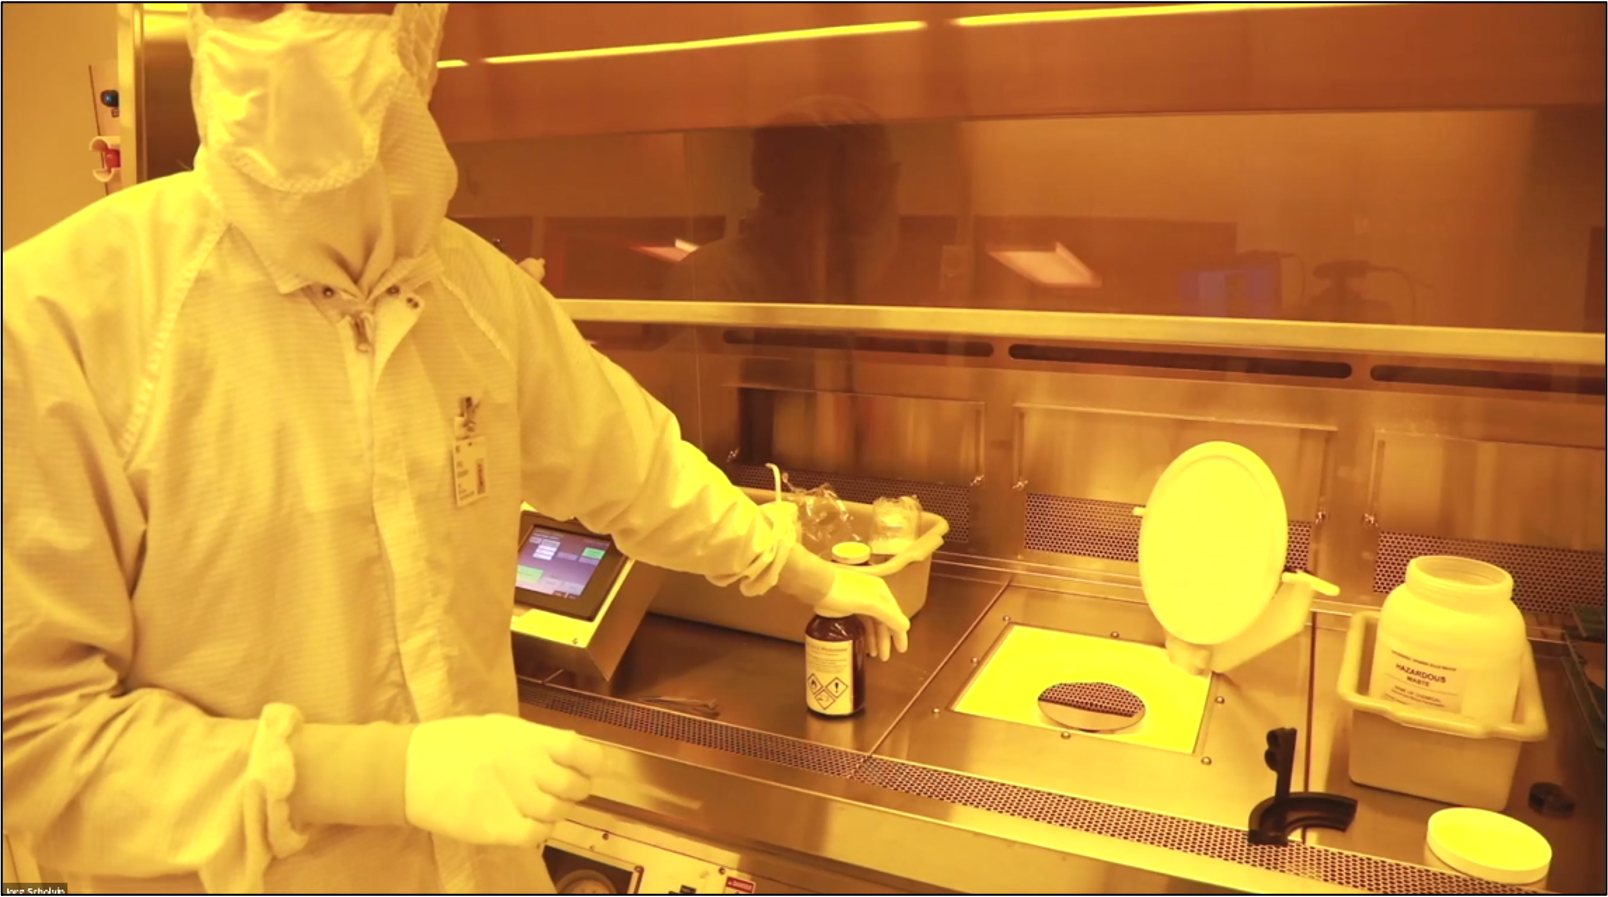 To pattern the thin layer of gold, scientists spin-coat the wafer with photoresist.  Here, the wafer is loaded onto a manual coater, and Assistant Director for User Services Jorg Scholvin is getting ready to apply the photoresist (in the bottle).